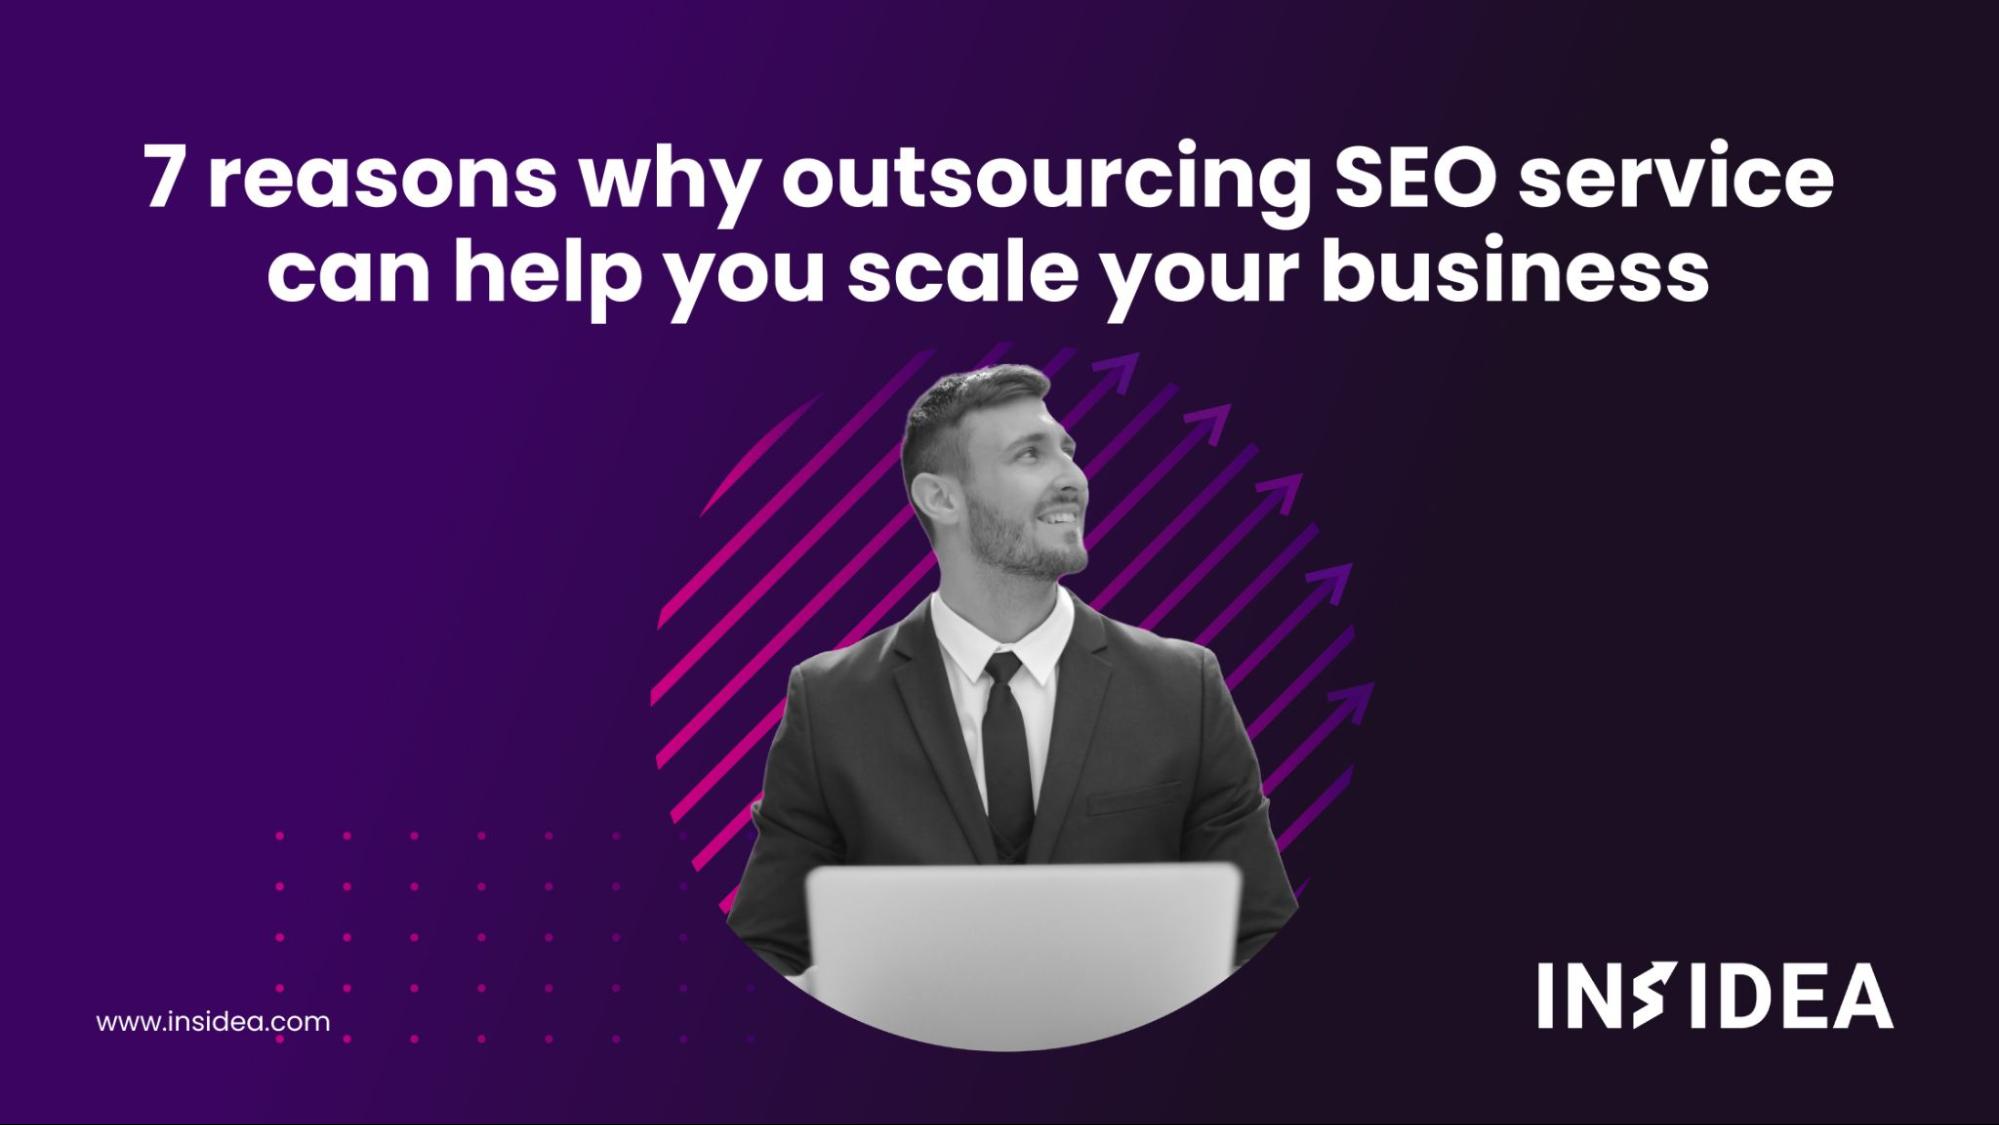 7 reasons why outsourcing SEO service can help you scale your business!